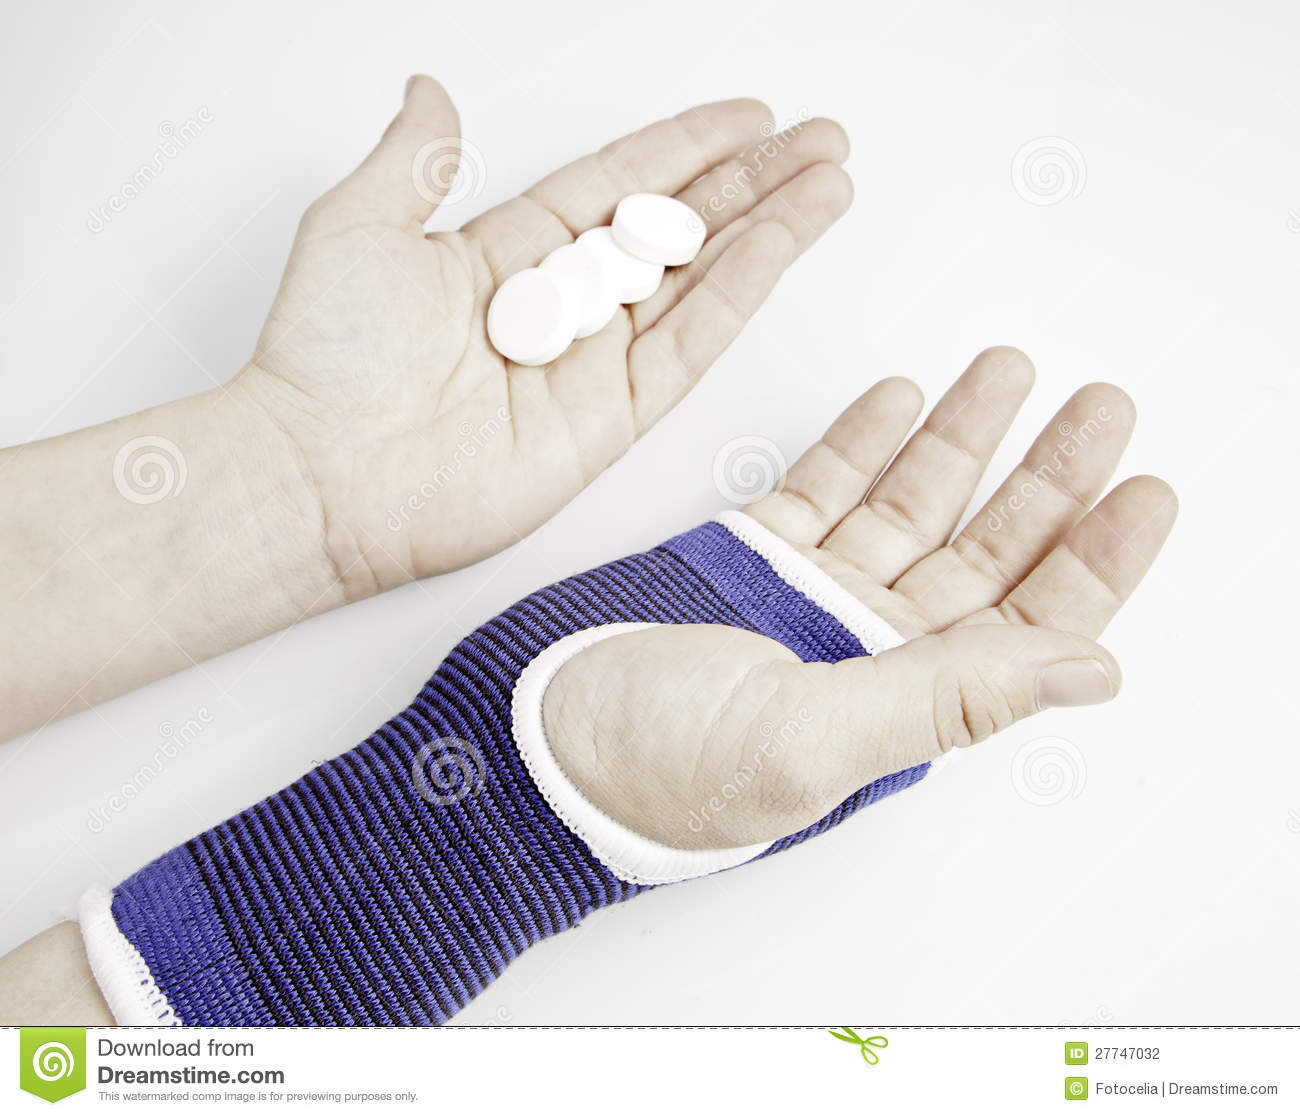 Hand Fracture And Wrist Strap Stock Photography   Image  27747032